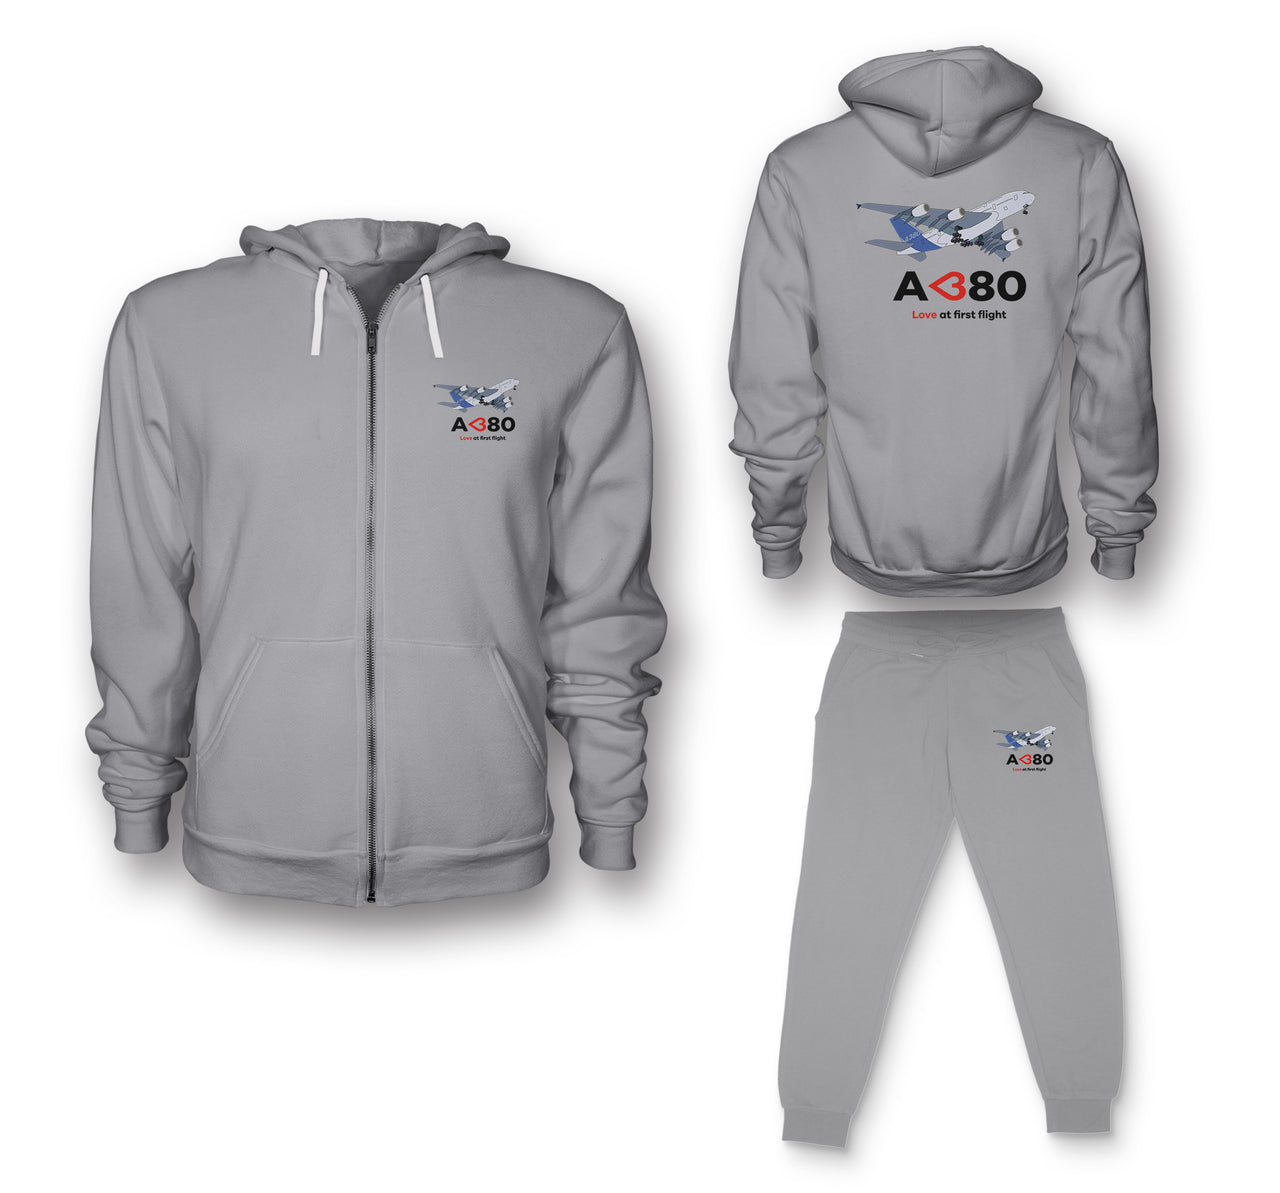 Airbus A380 Love at first flight Designed Zipped Hoodies & Sweatpants Set